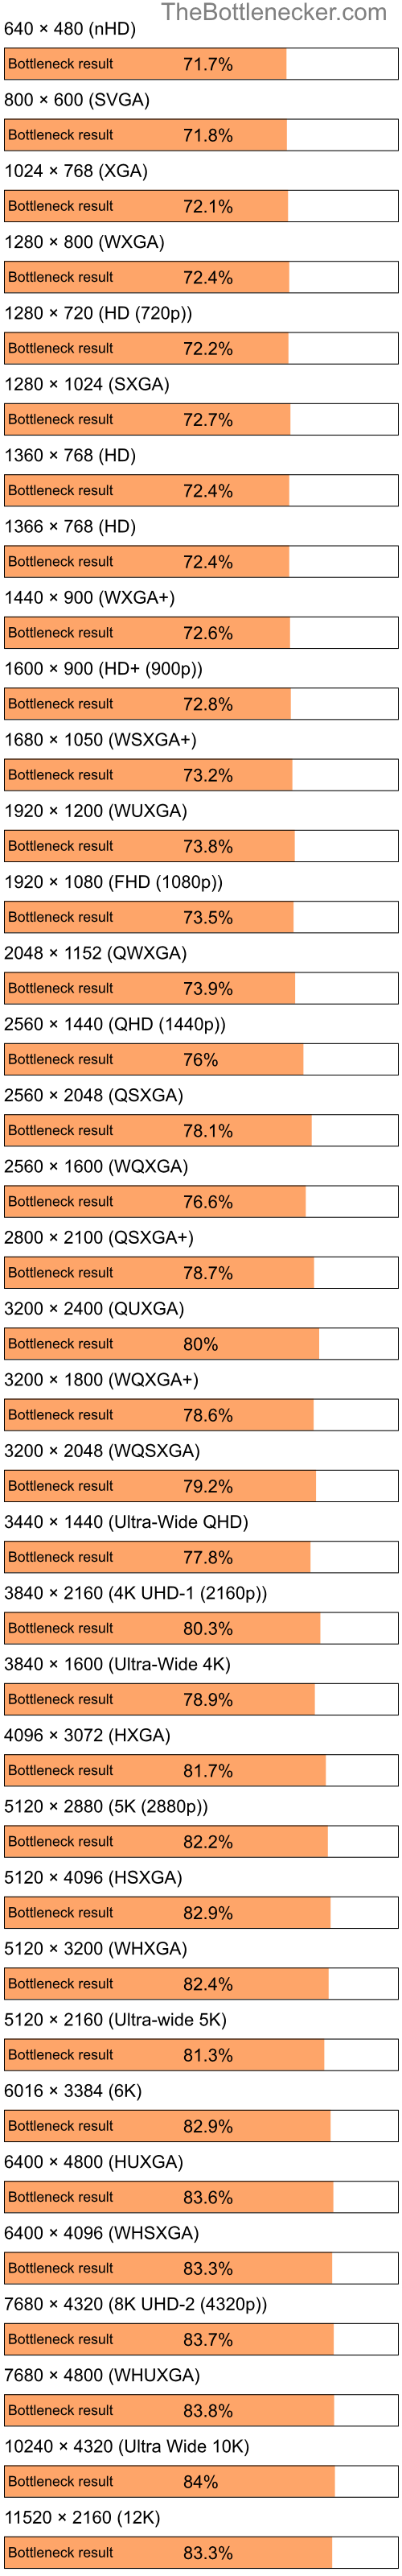 Bottleneck results by resolution for Intel Atom Z520 and AMD Radeon X1650 Pro in Graphic Card Intense Tasks